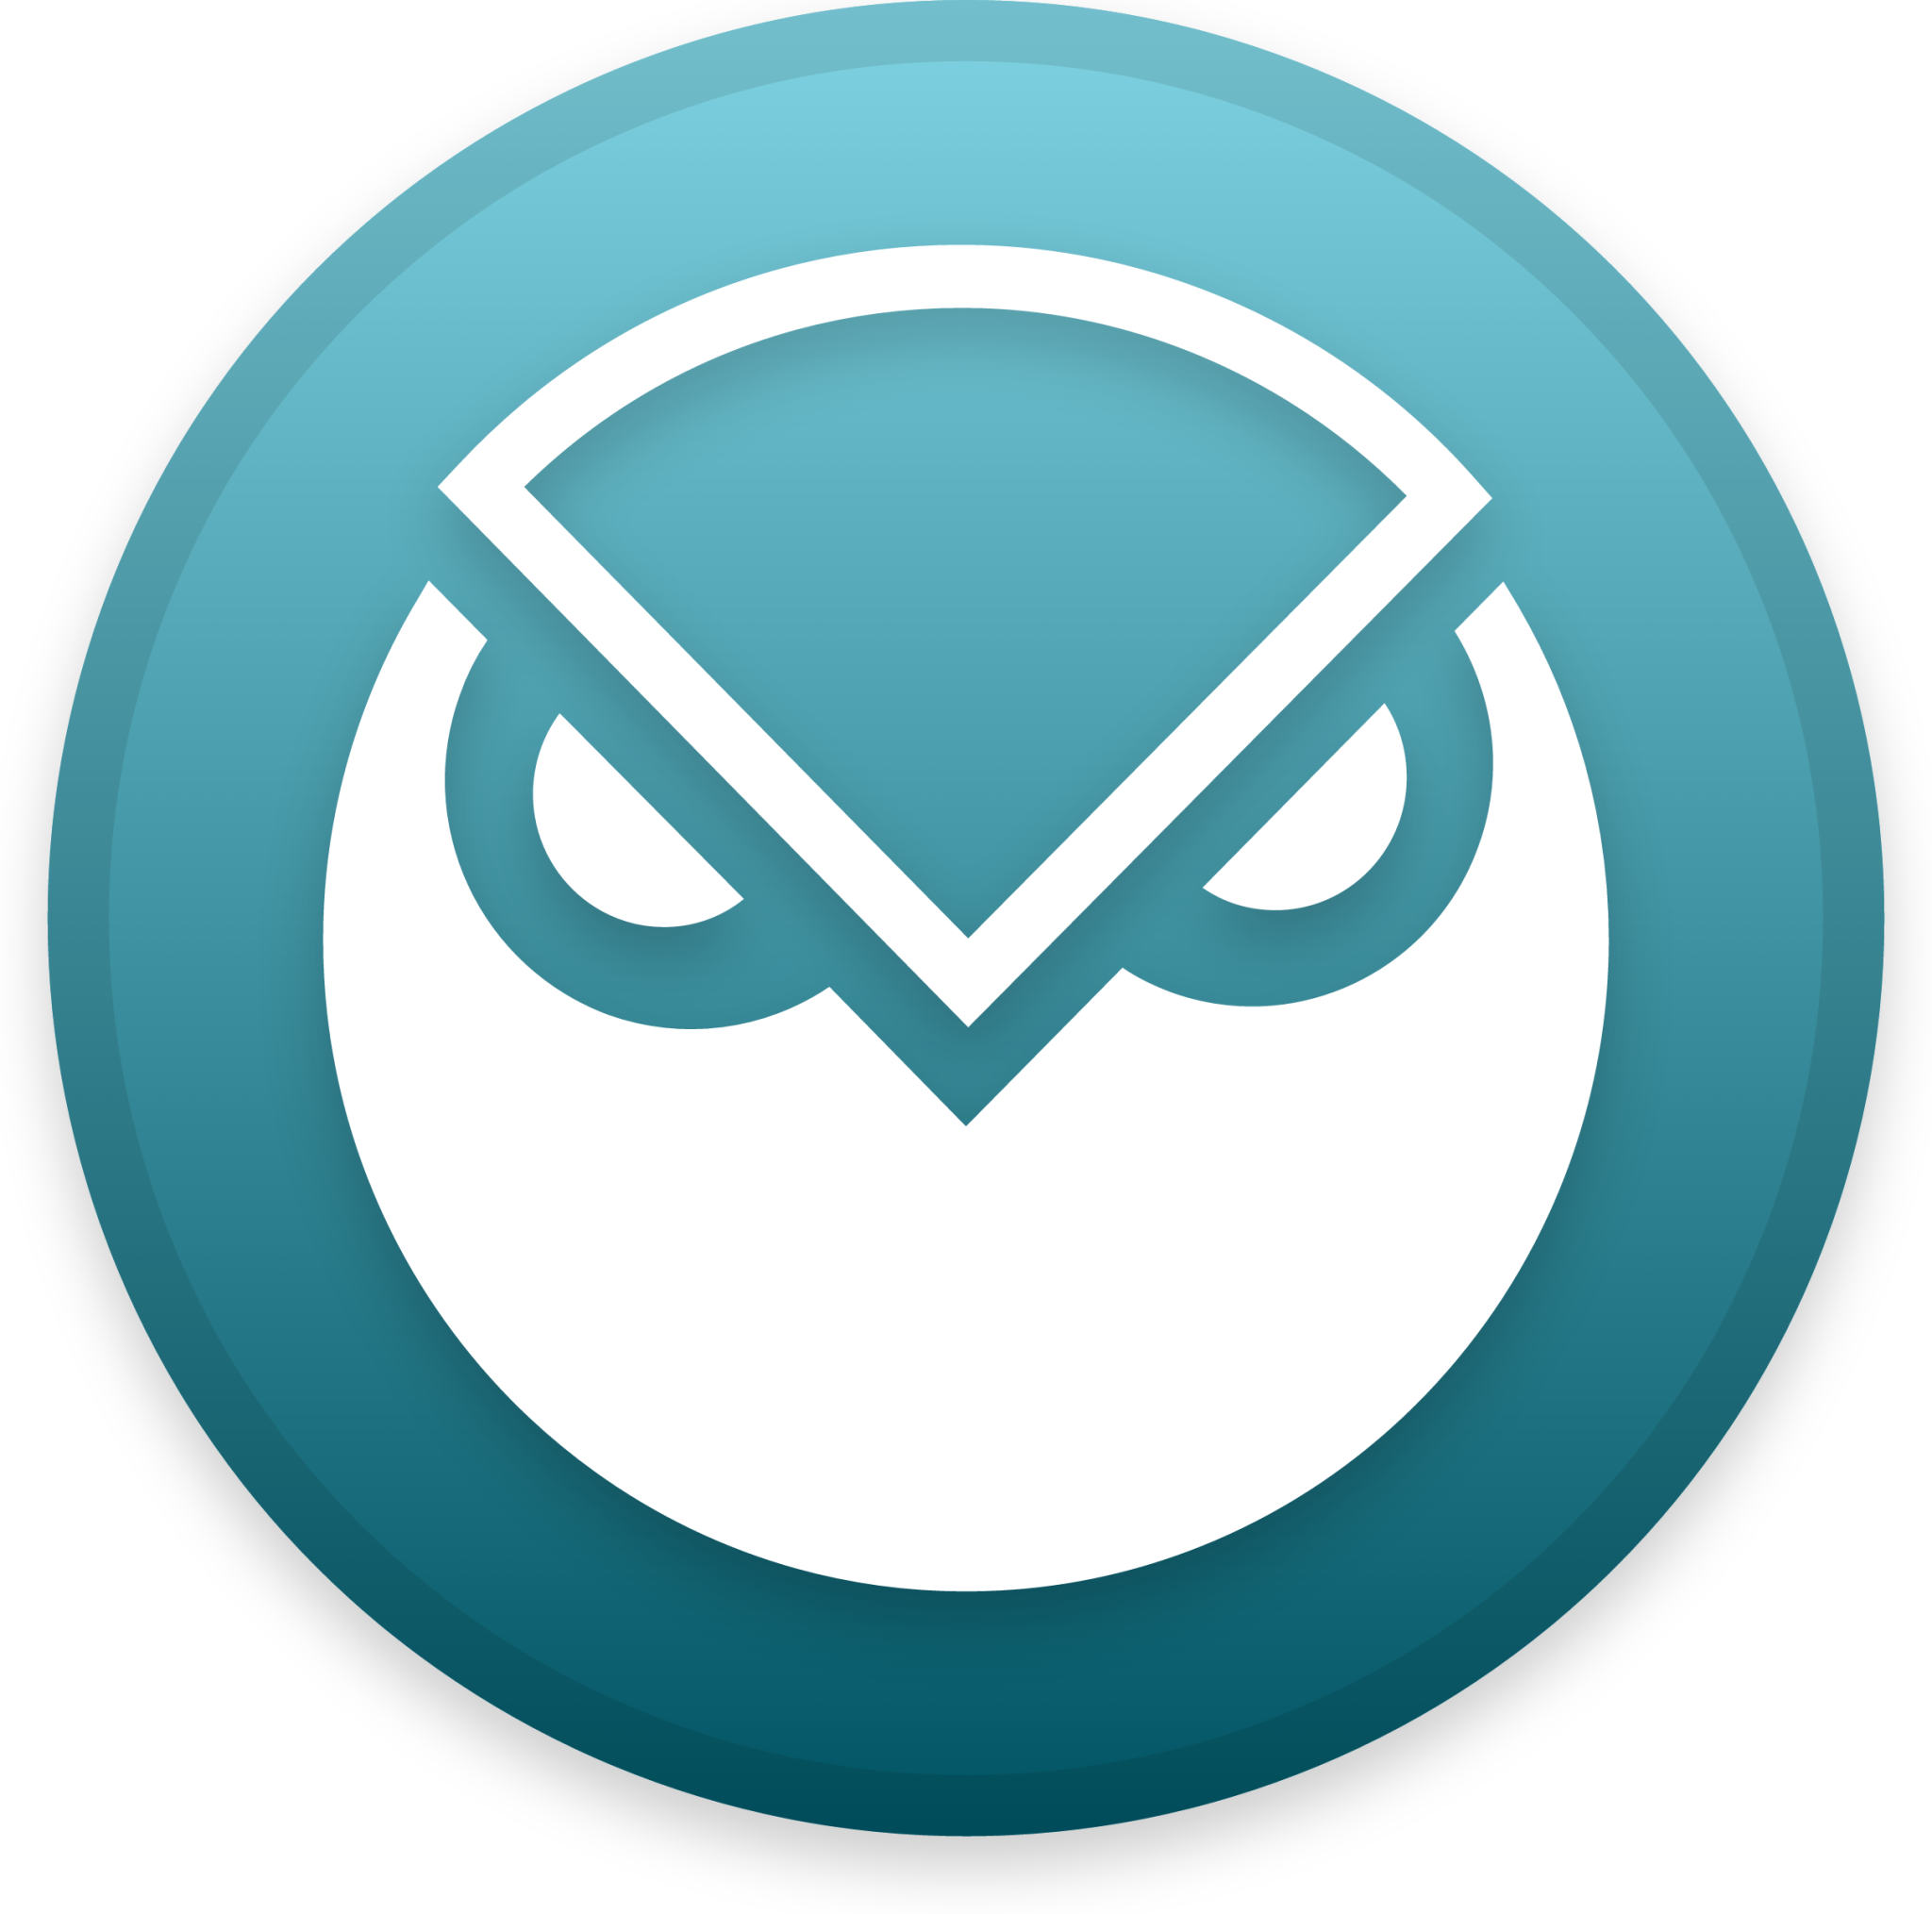 Gnosis Cryptocurrency icon